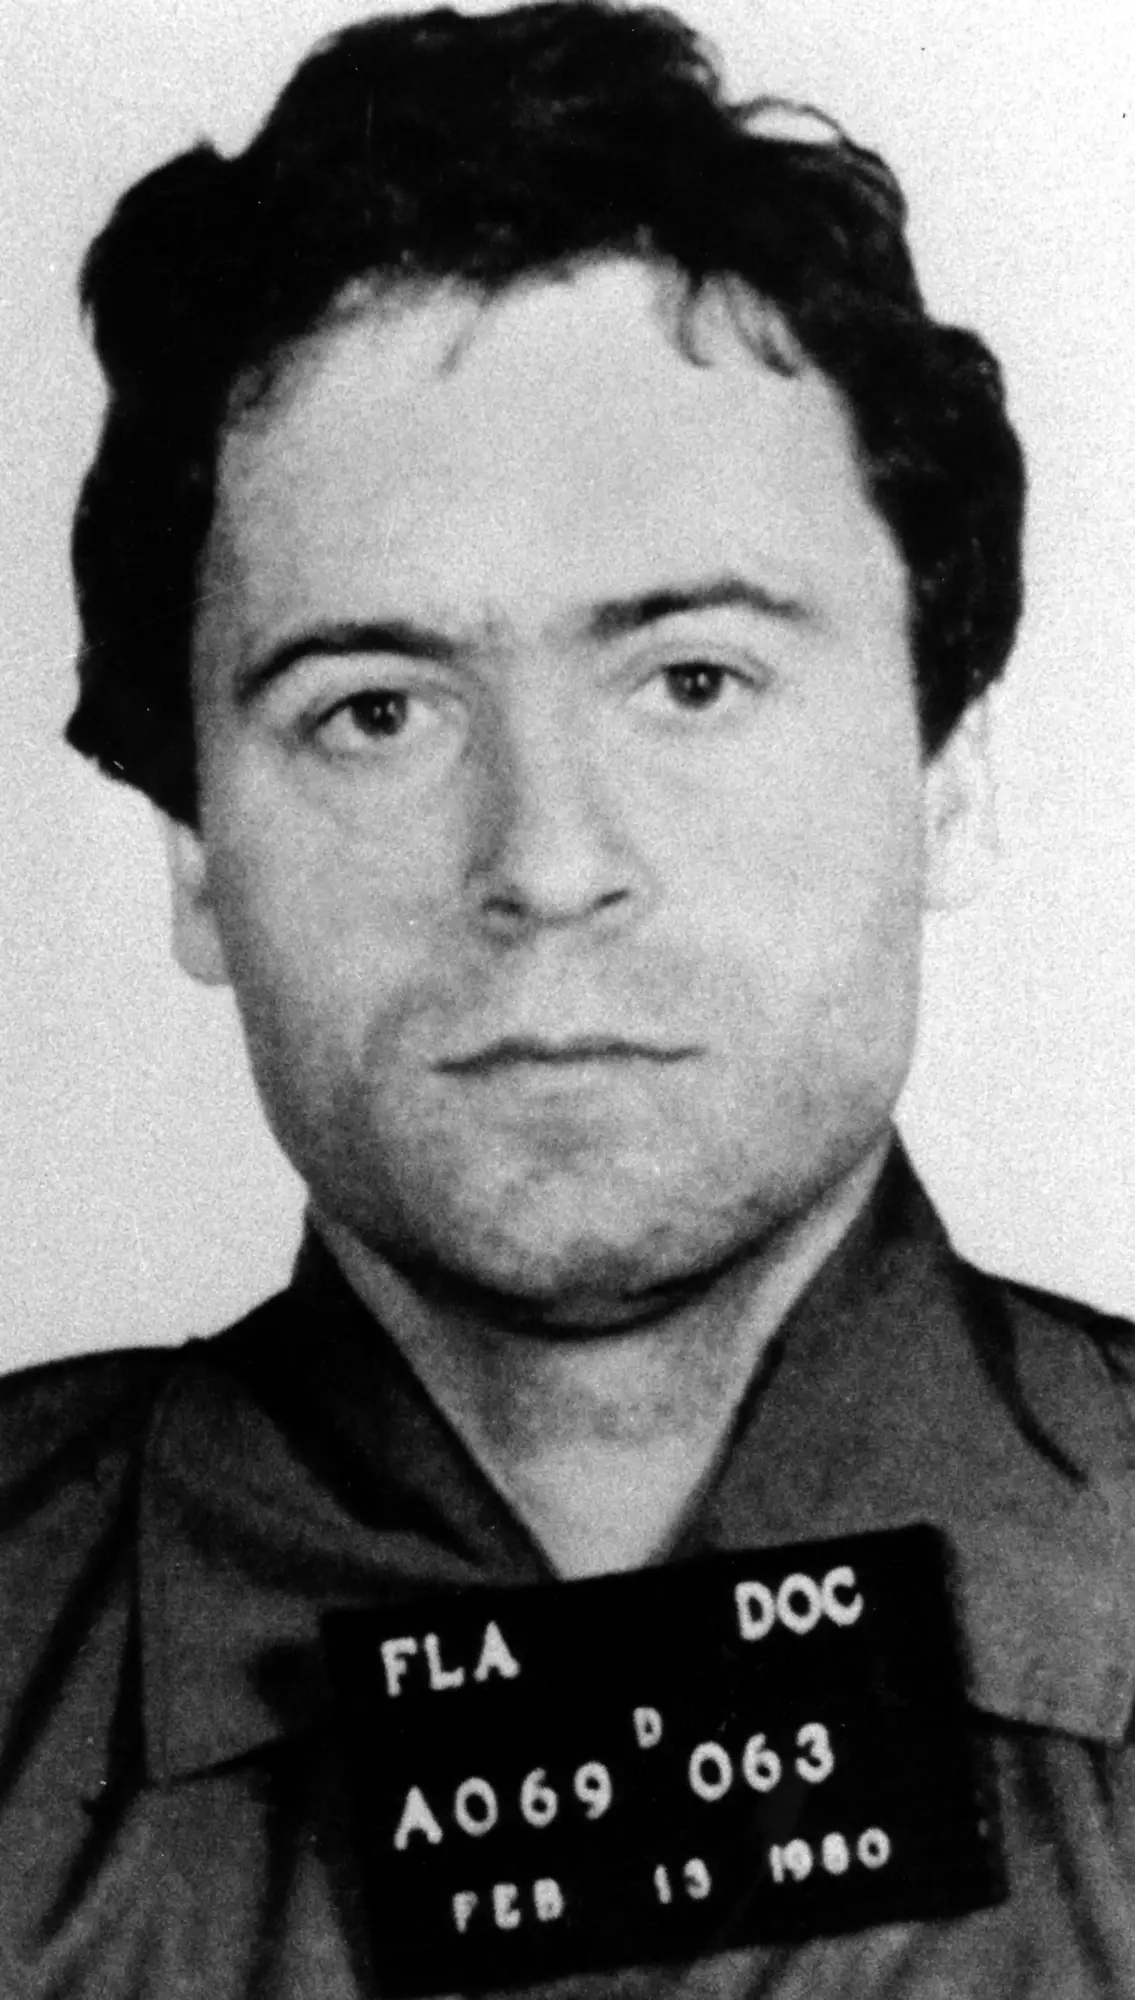 Ted Bundy was convicted of 12 murders.